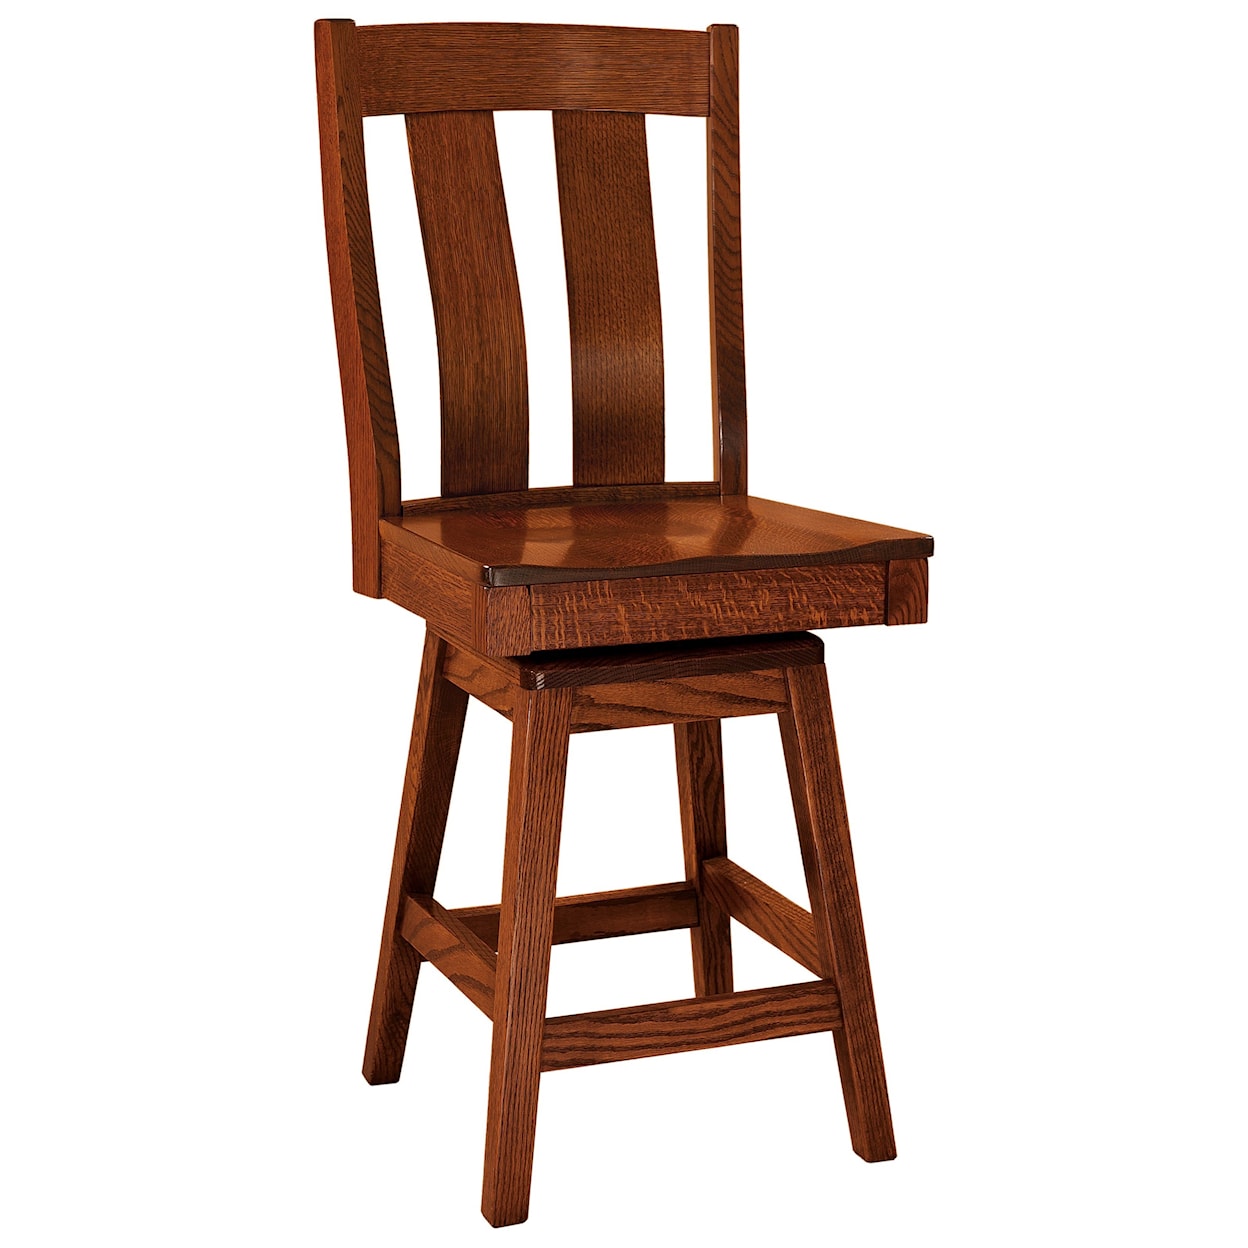 F&N Woodworking Laurie Swivel Bar Stool - Fabric Seat